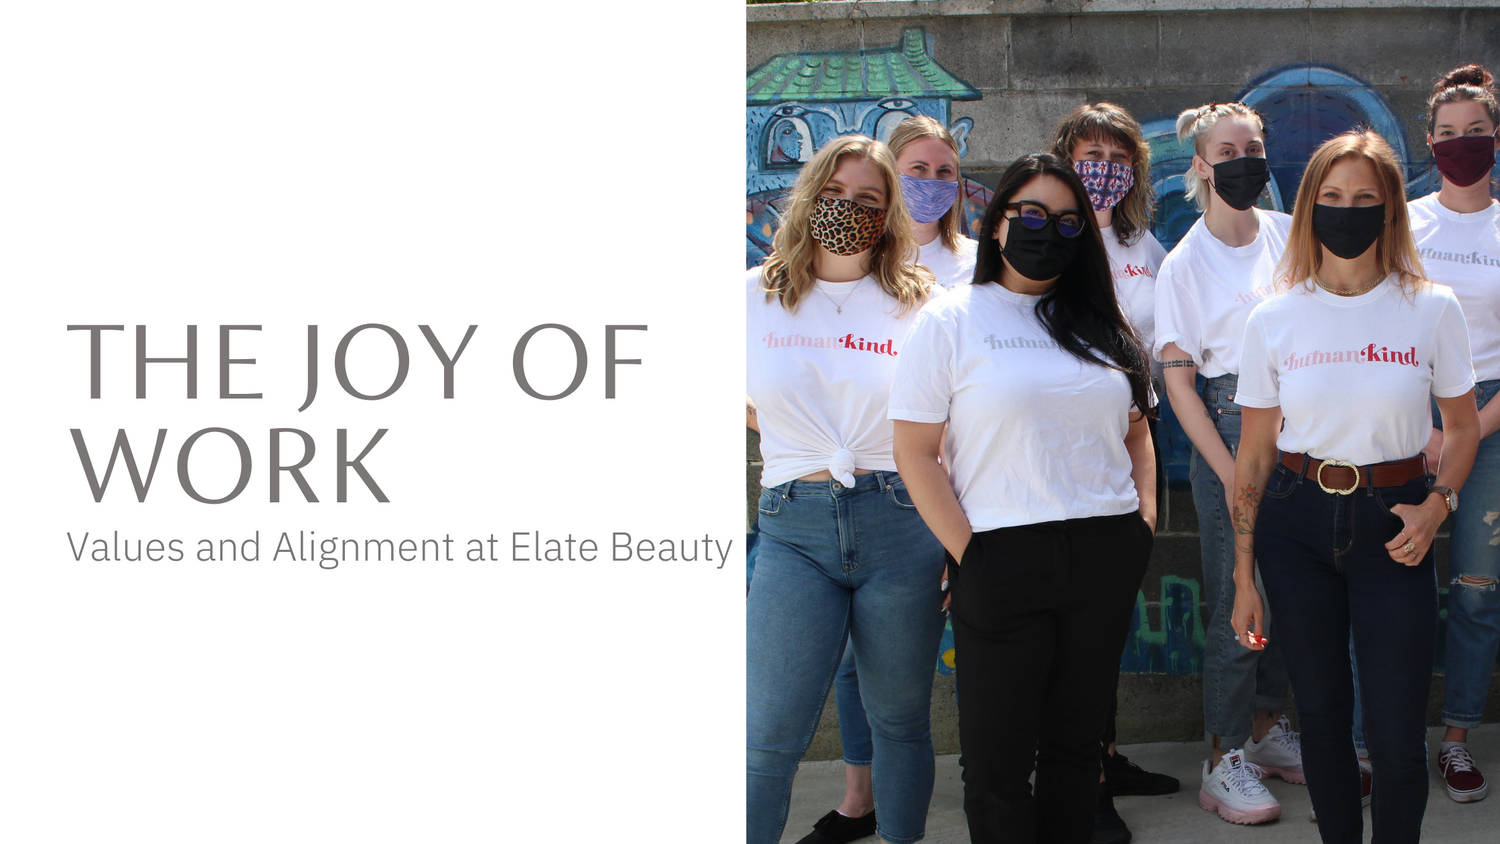 The Joy of Work: Values and Alignment at Elate Beauty